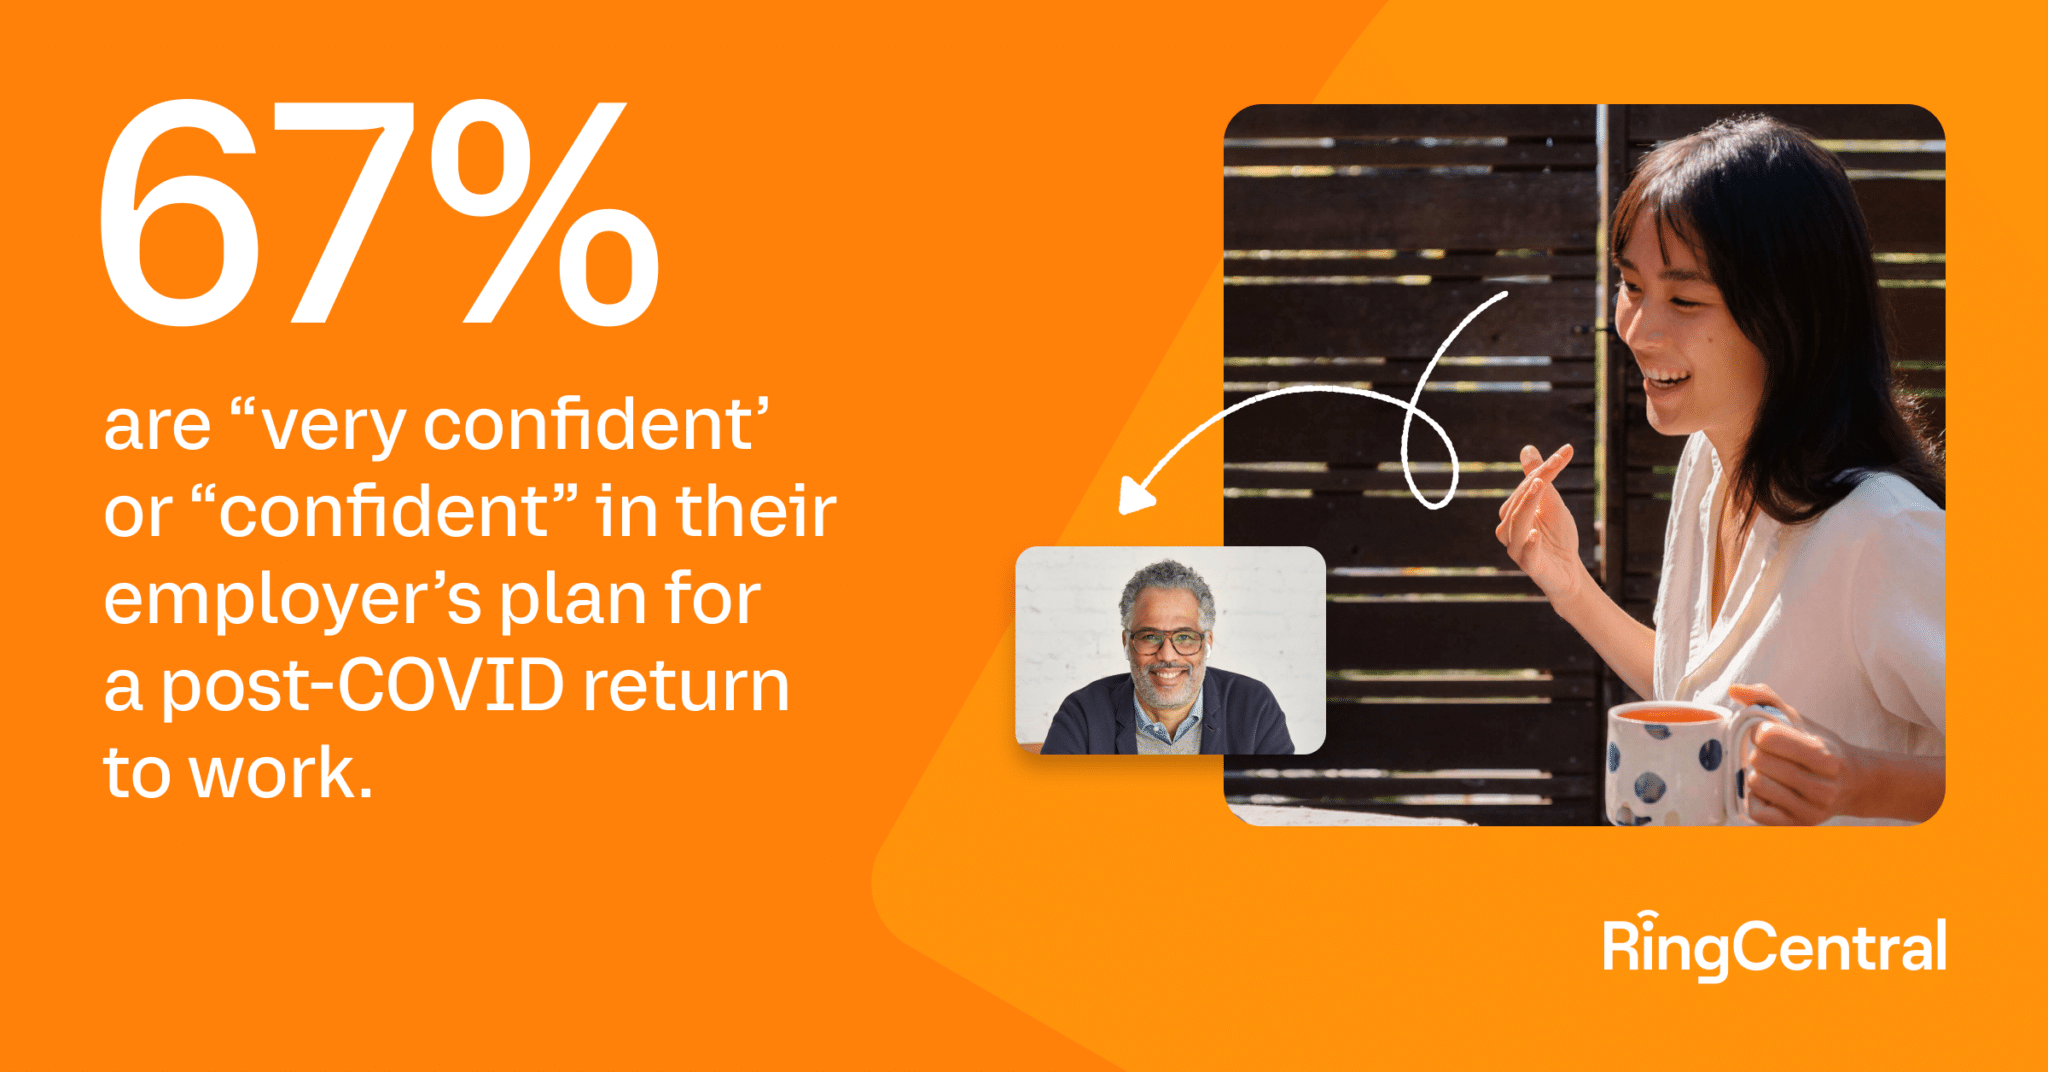 state of human connections report 67% are “very confident’ or “confident” in their employer’s plan for a post-COVID return to work.